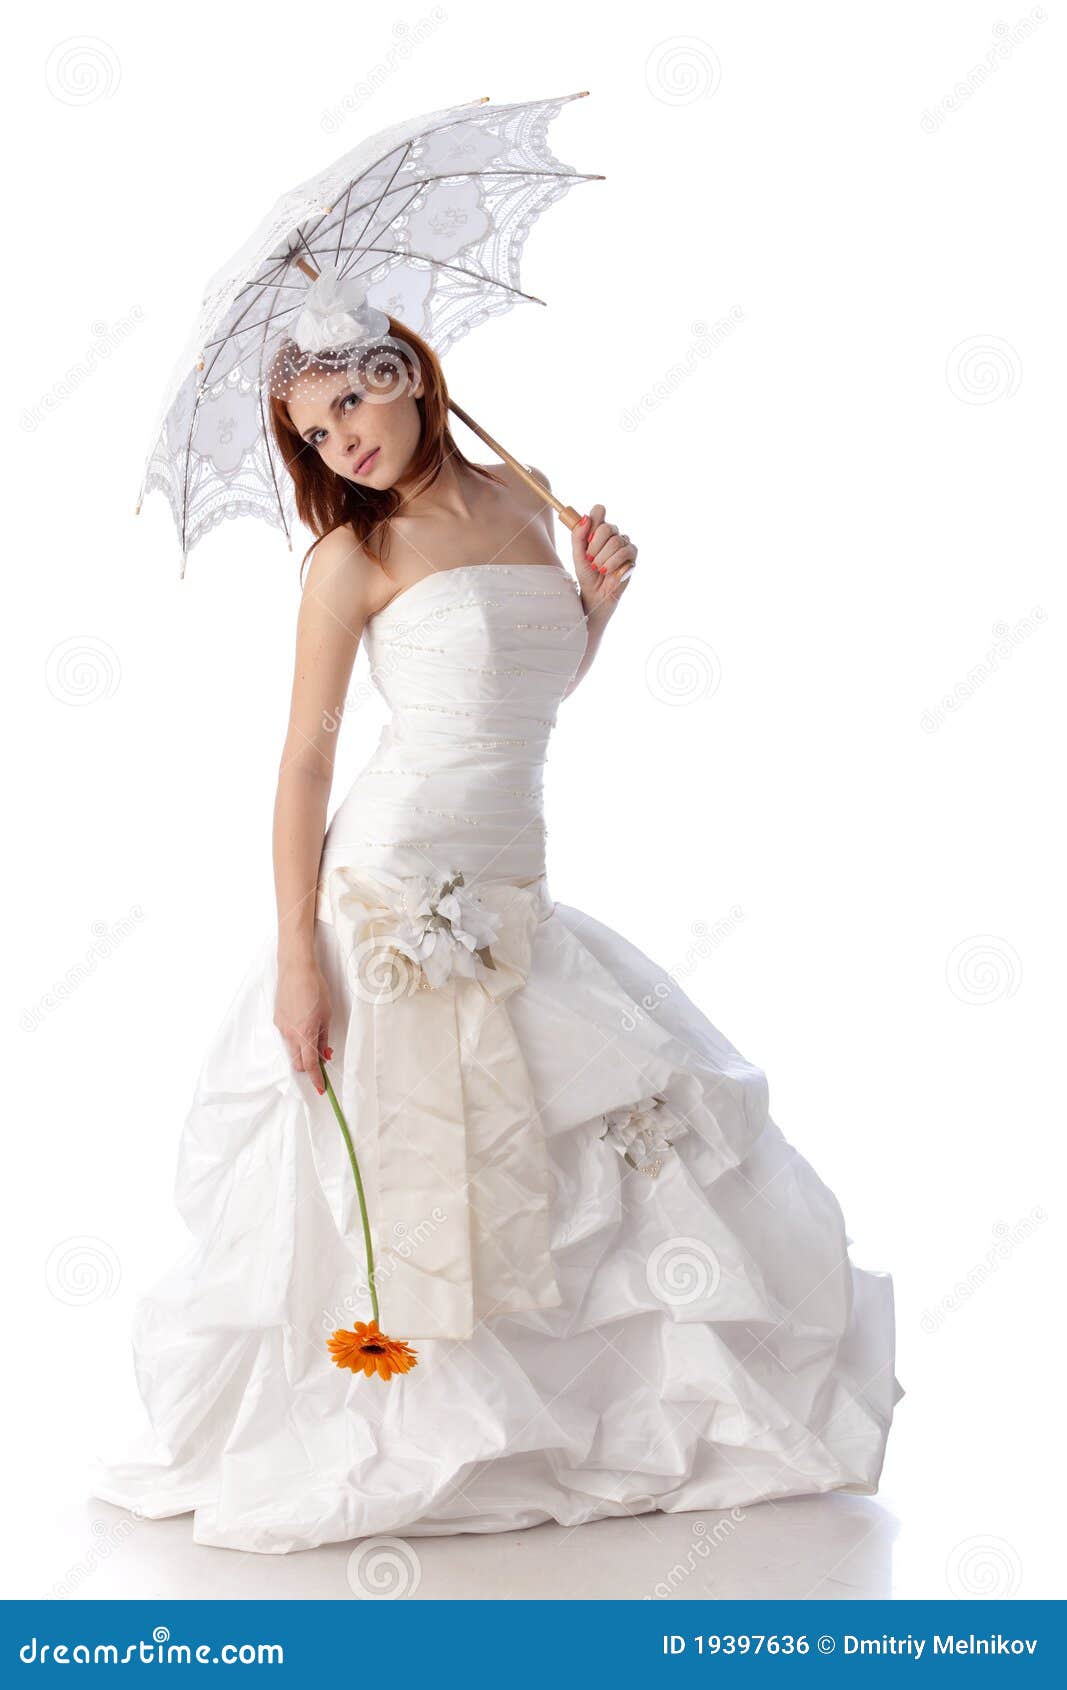  Young  Woman  In A Wedding  Dress  Royalty Free Stock Image 